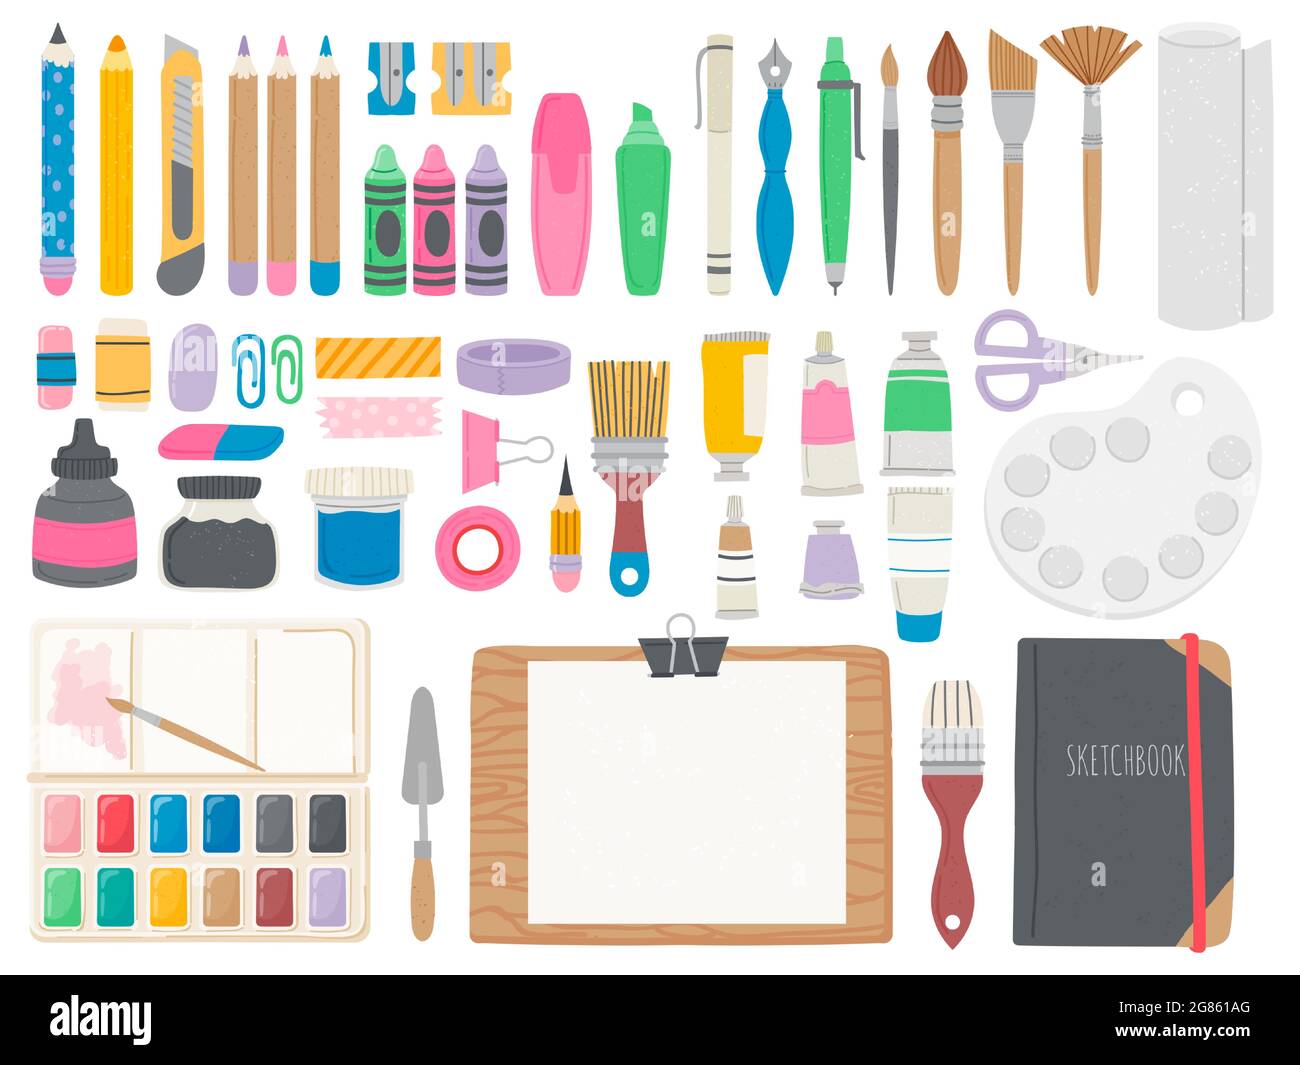 https://c8.alamy.com/comp/2G861AG/art-supplies-artist-toolkit-with-crayons-brushes-watercolor-paint-tubes-pencils-and-easel-equipment-for-draw-and-calligraphy-vector-set-2G861AG.jpg